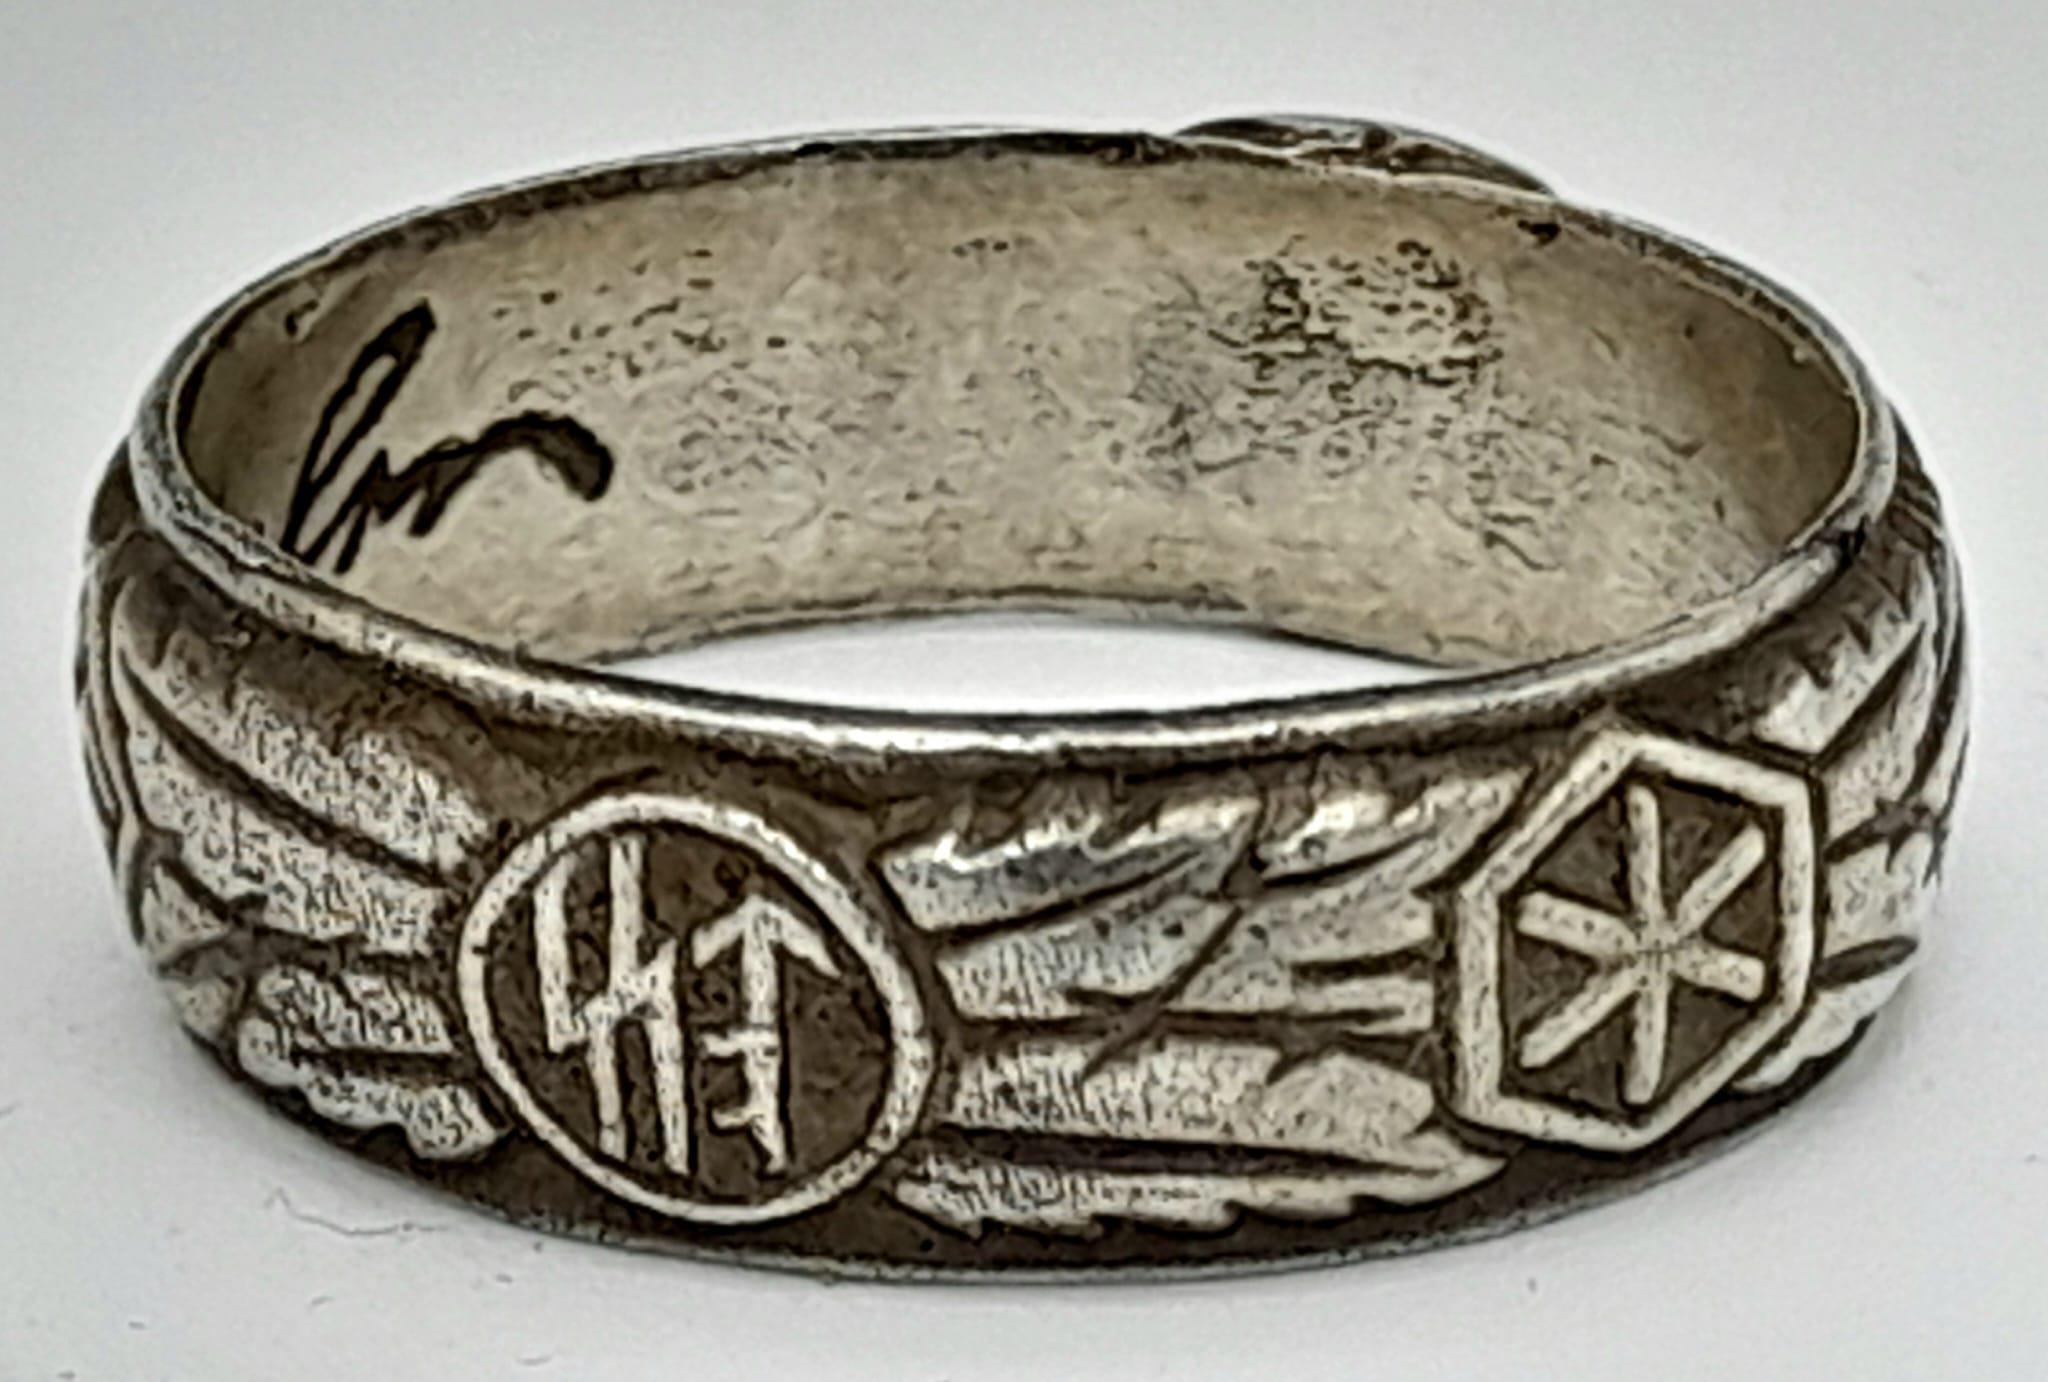 WW2 Period German Silver Skull Tote Ring with Inscription on Inner Shank Size Z+1. 9.06 Grams - Image 3 of 4